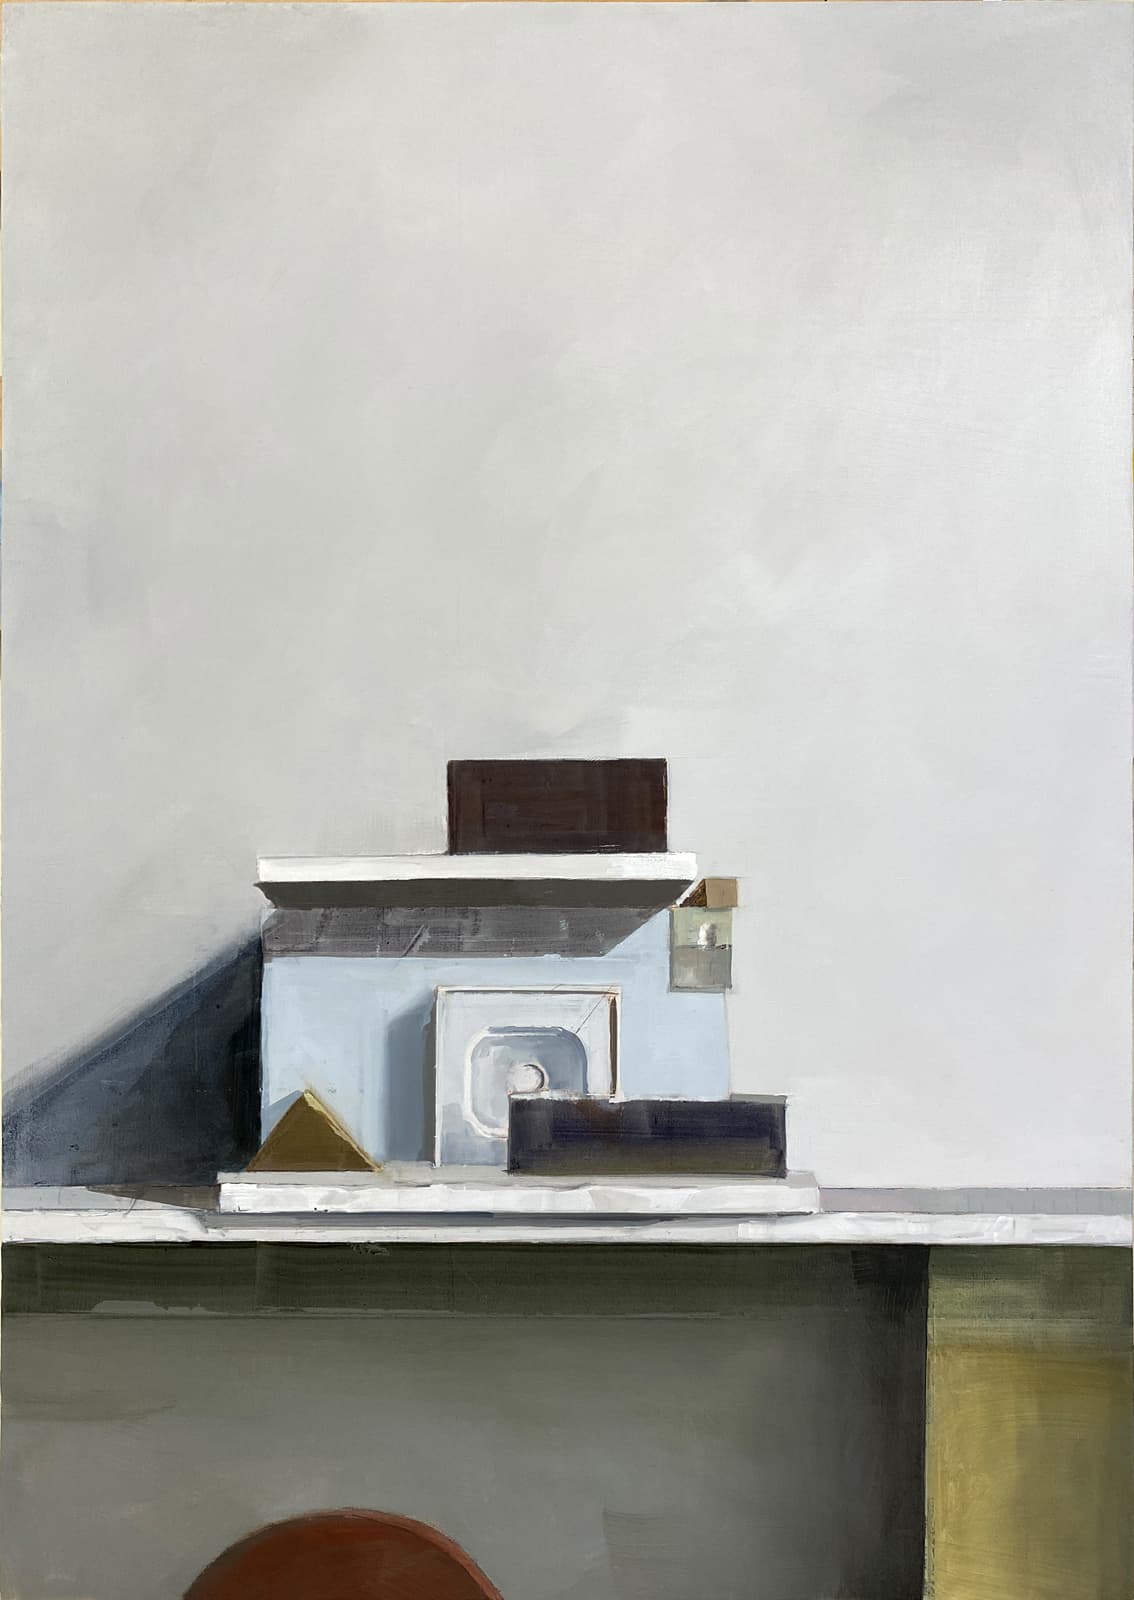 Sheetrock house with outdoor painting and jewel tones, 2022, oil on panel, 51 x 35,5 cm